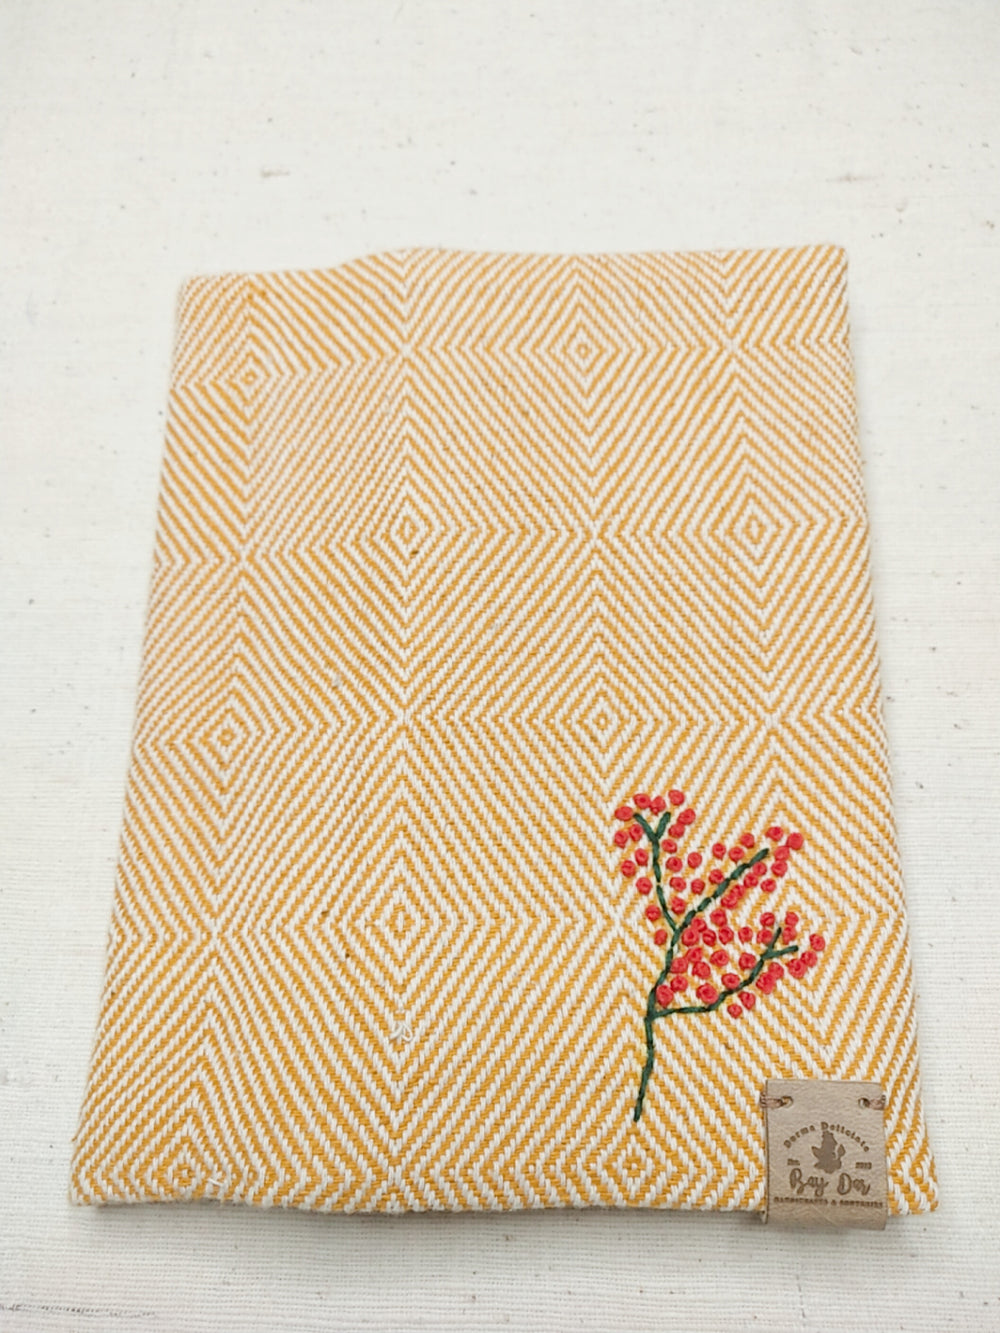 100% Cotton Book Cover with Beautiful Embroidery Flowers (Design 2)